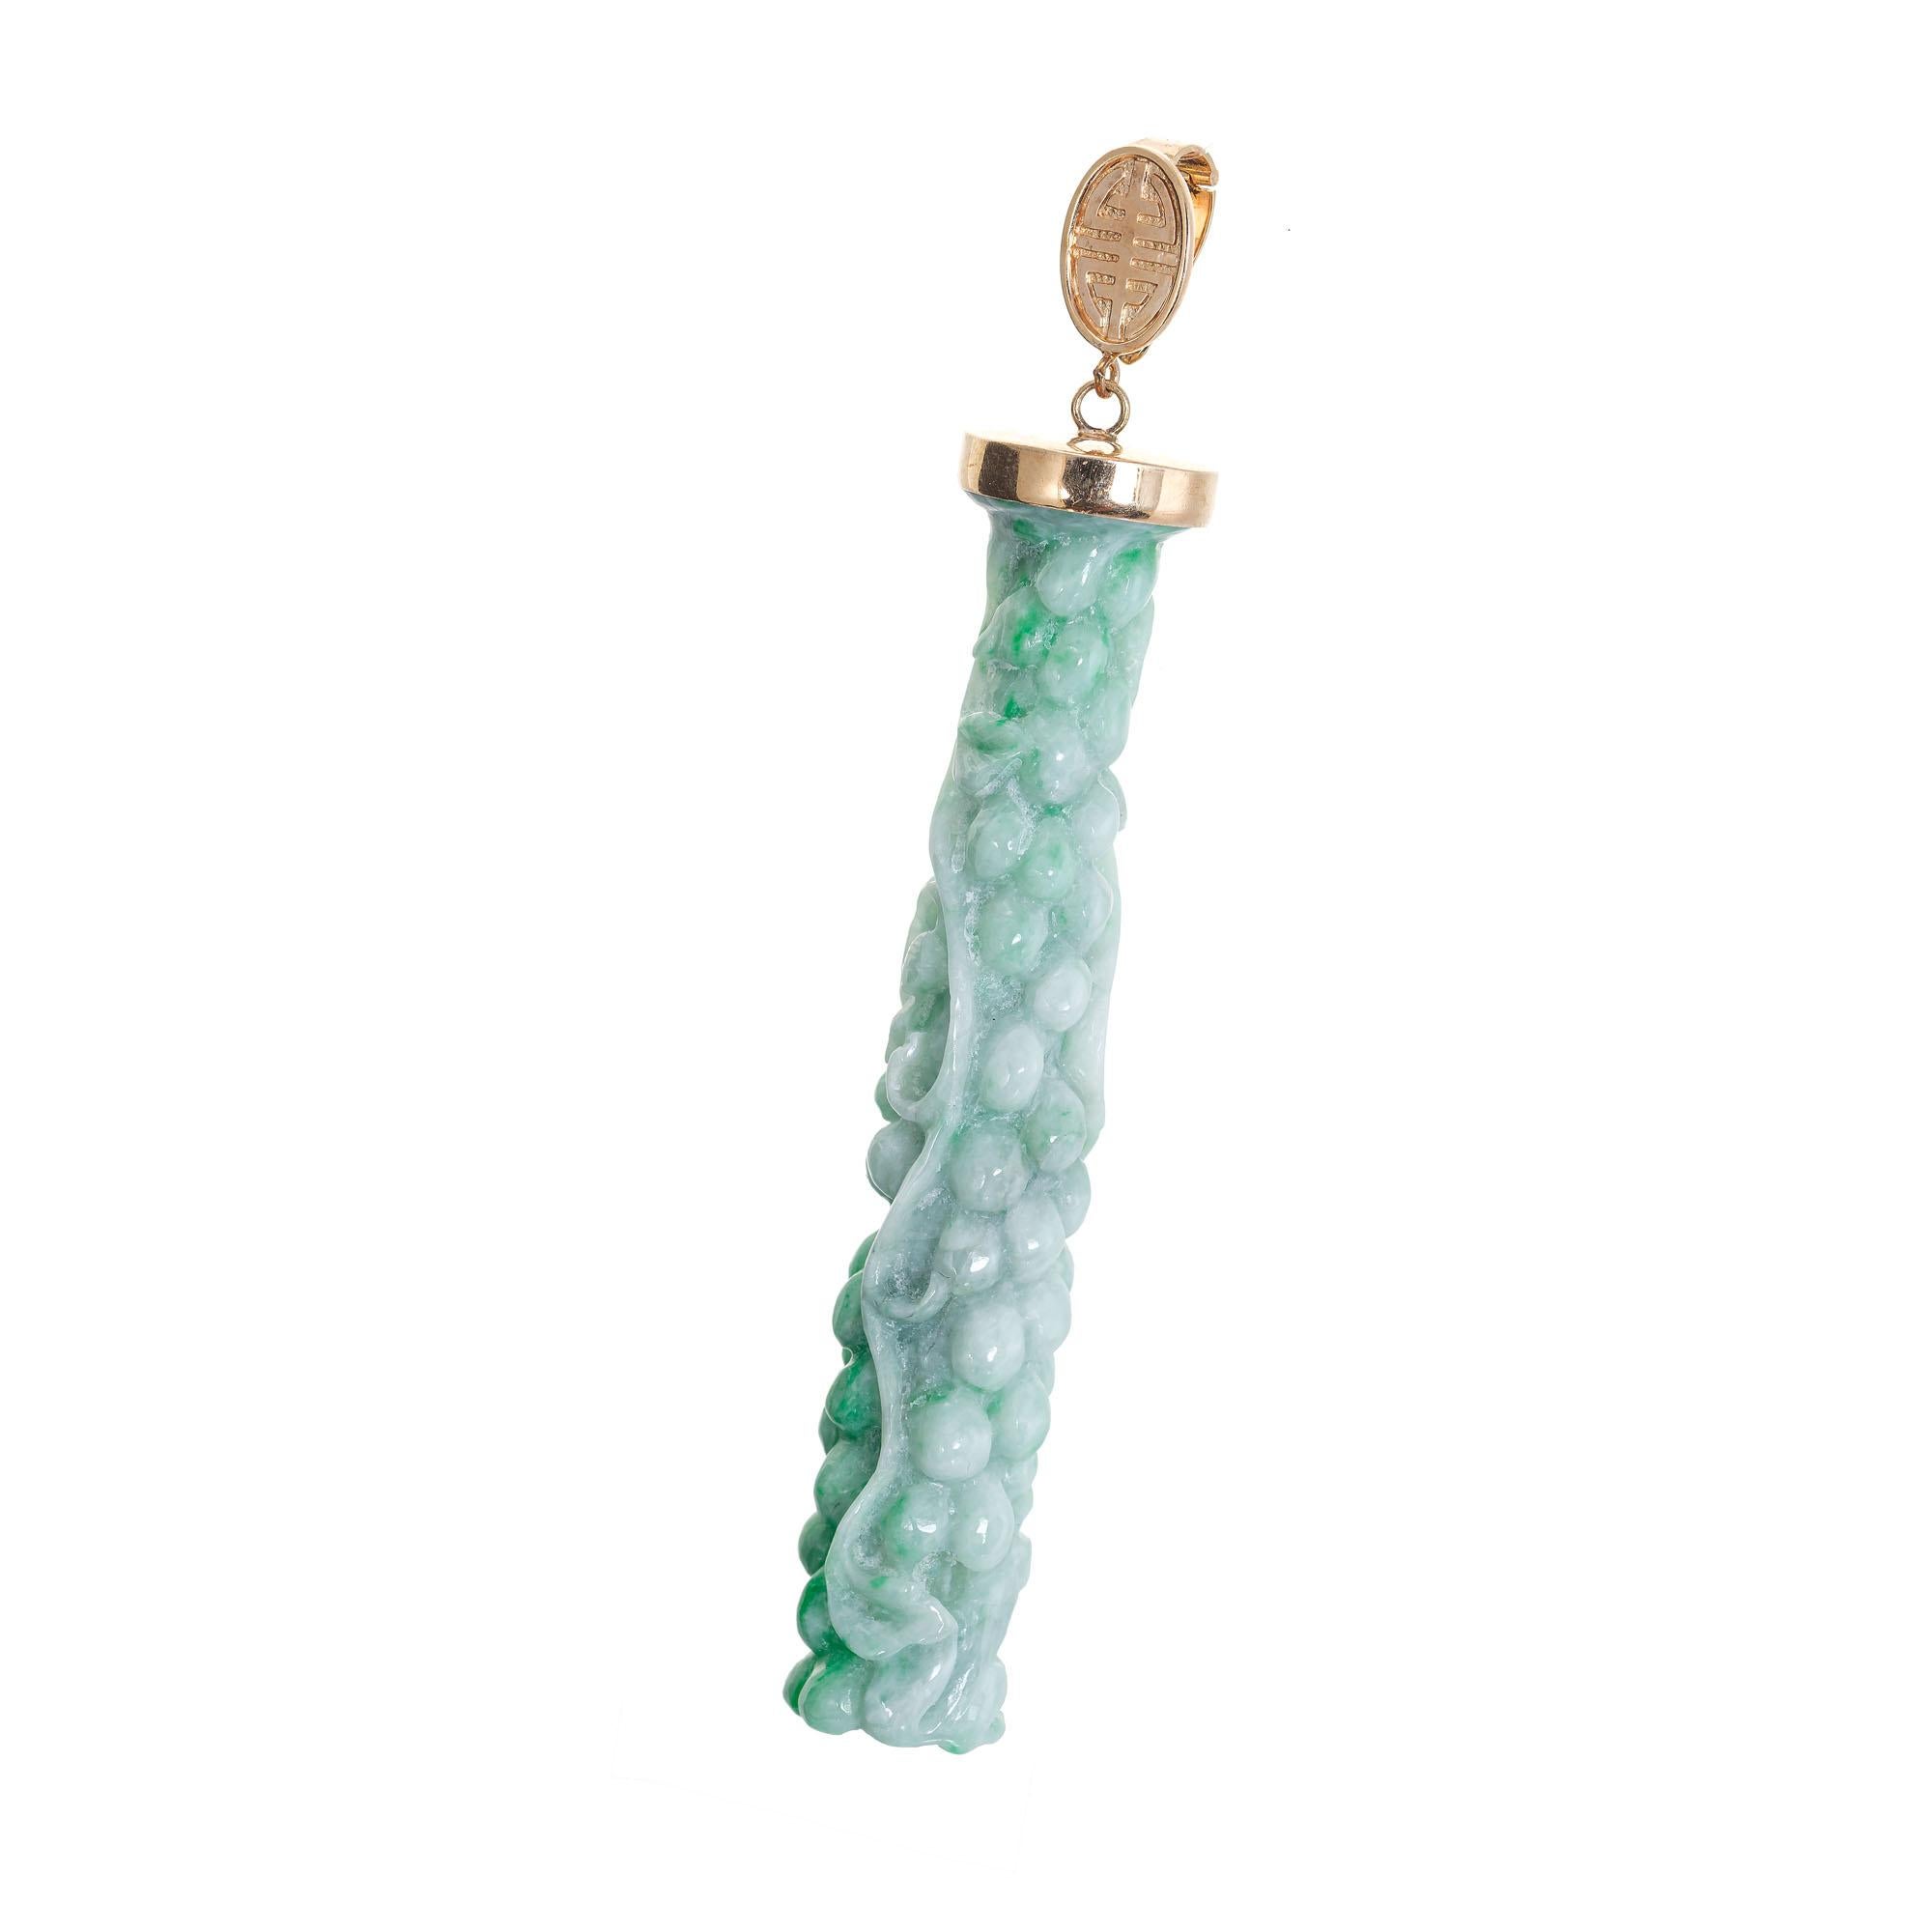 Natural untreated carved variegated Jadeite Jade pendant with a 14k rose gold top with a hinged pendant enhancer loop. 

Natural Jadeite Jade variegated green tapered carving 73 x 13 x 13mm.   GIA certified #5131341597 natural color no